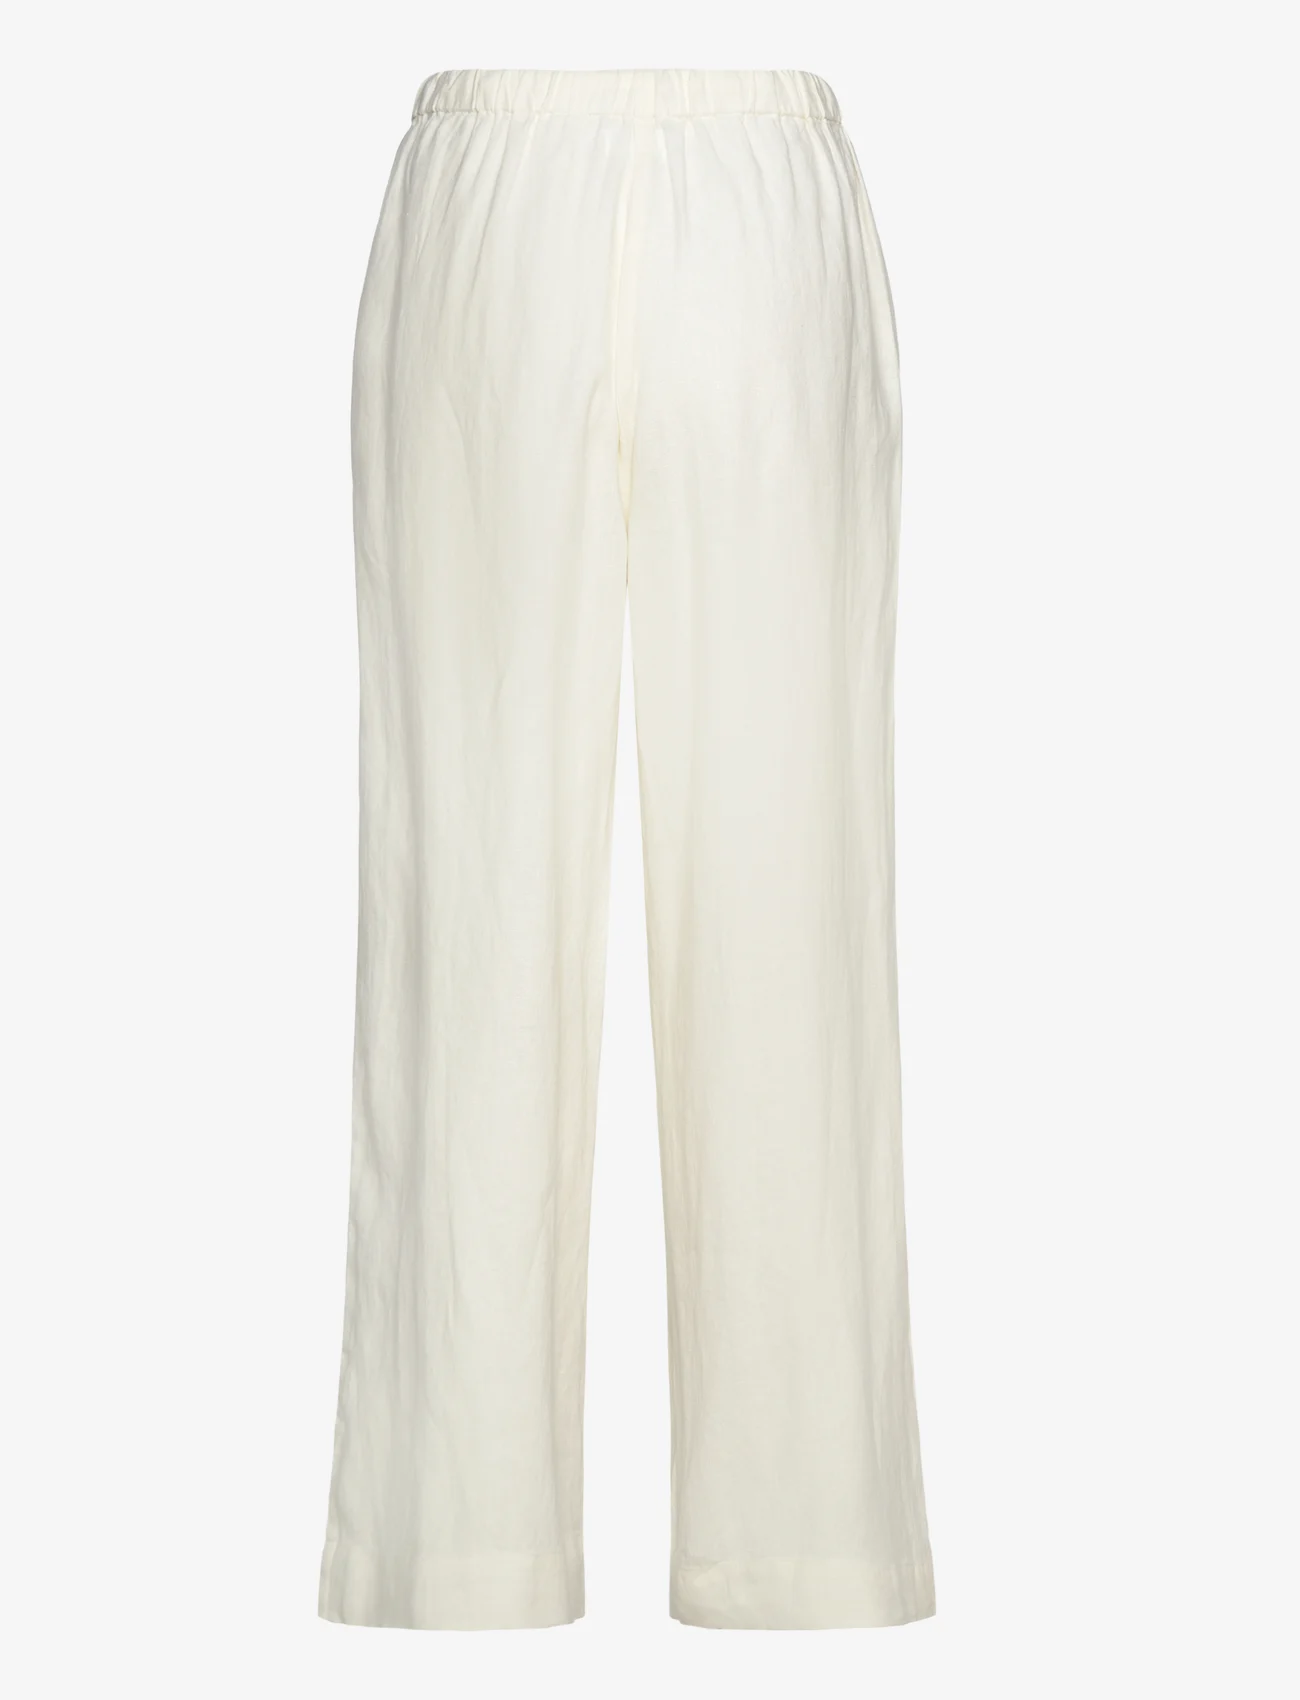 Creative Collective - Alana Pants - linen trousers - white - 1